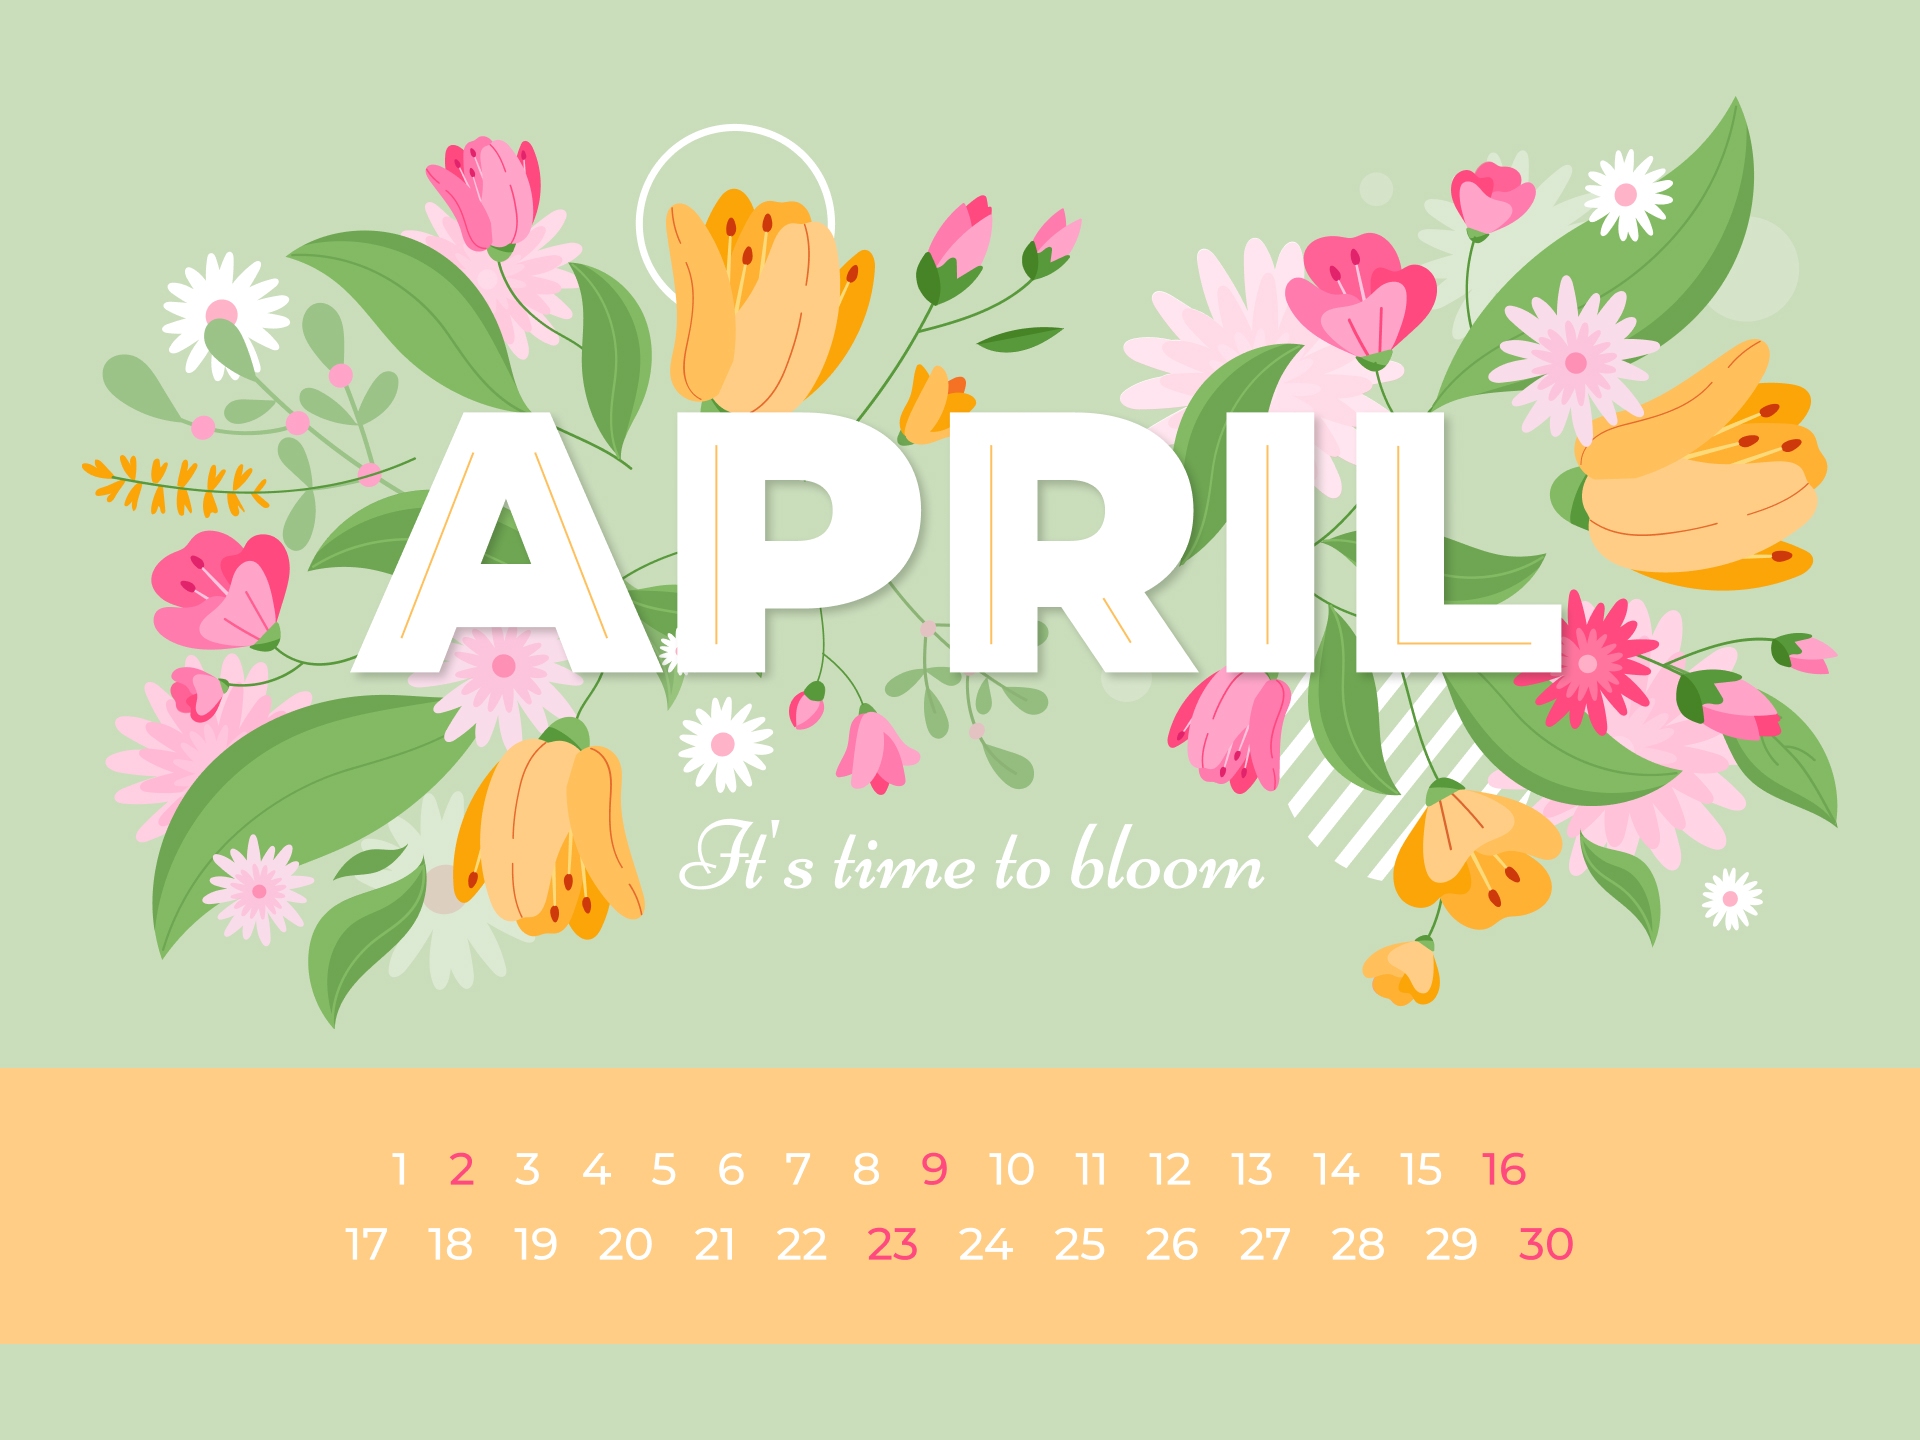 Calendar with flowers and the word april on it.